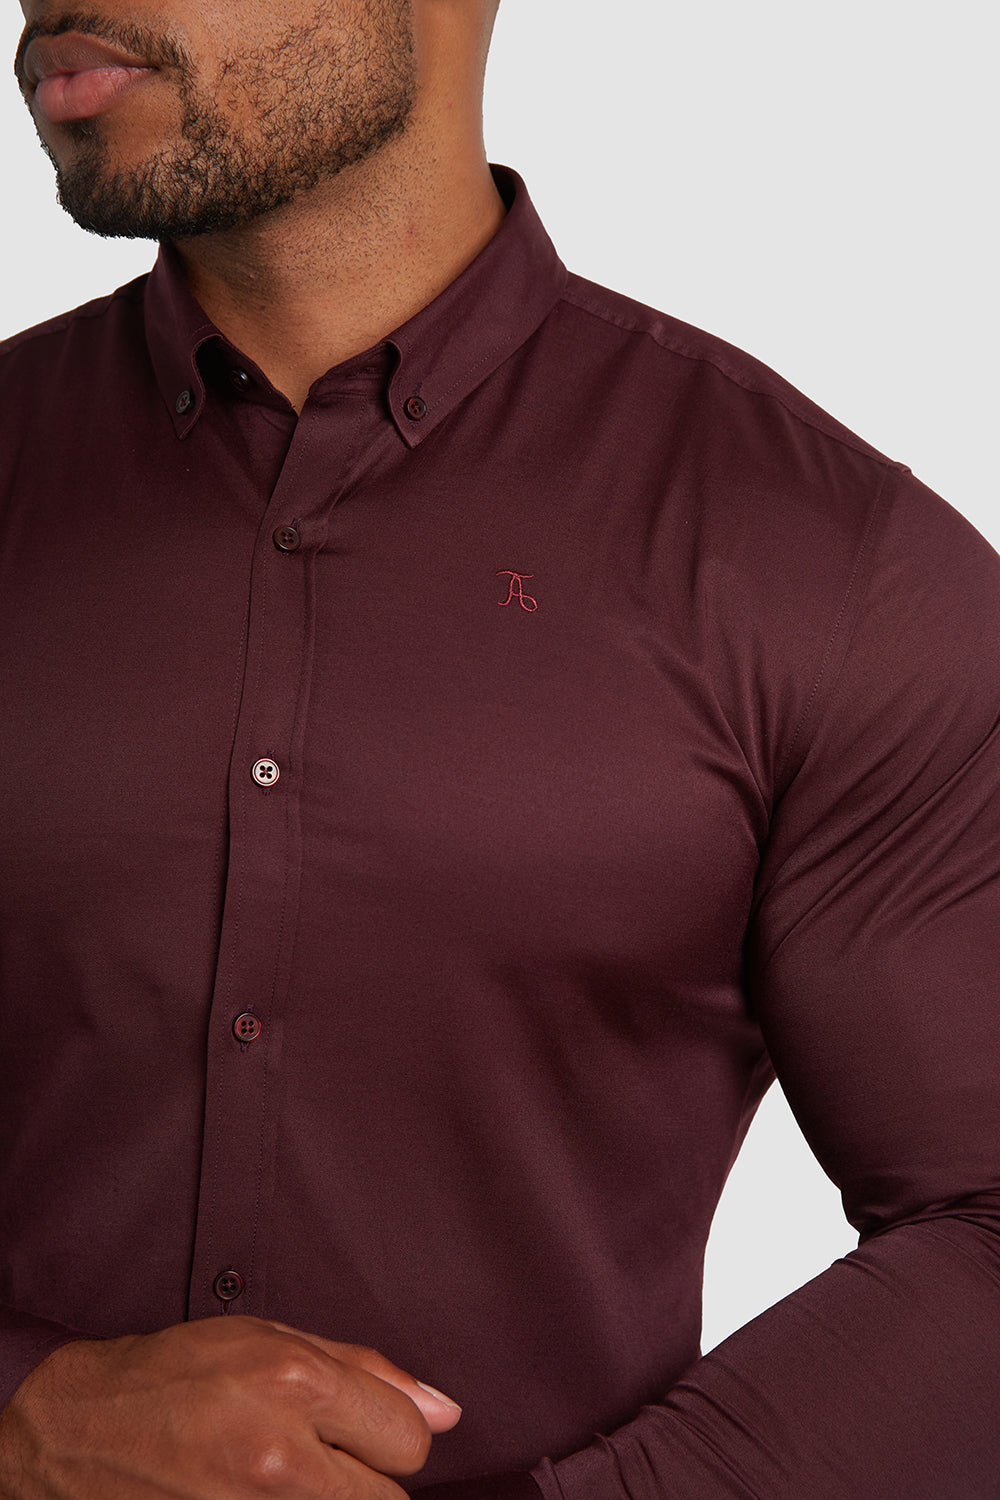 Muscle Fit Signature Shirt 2.0 - USA ATHLETE Burgundy in TAILORED 